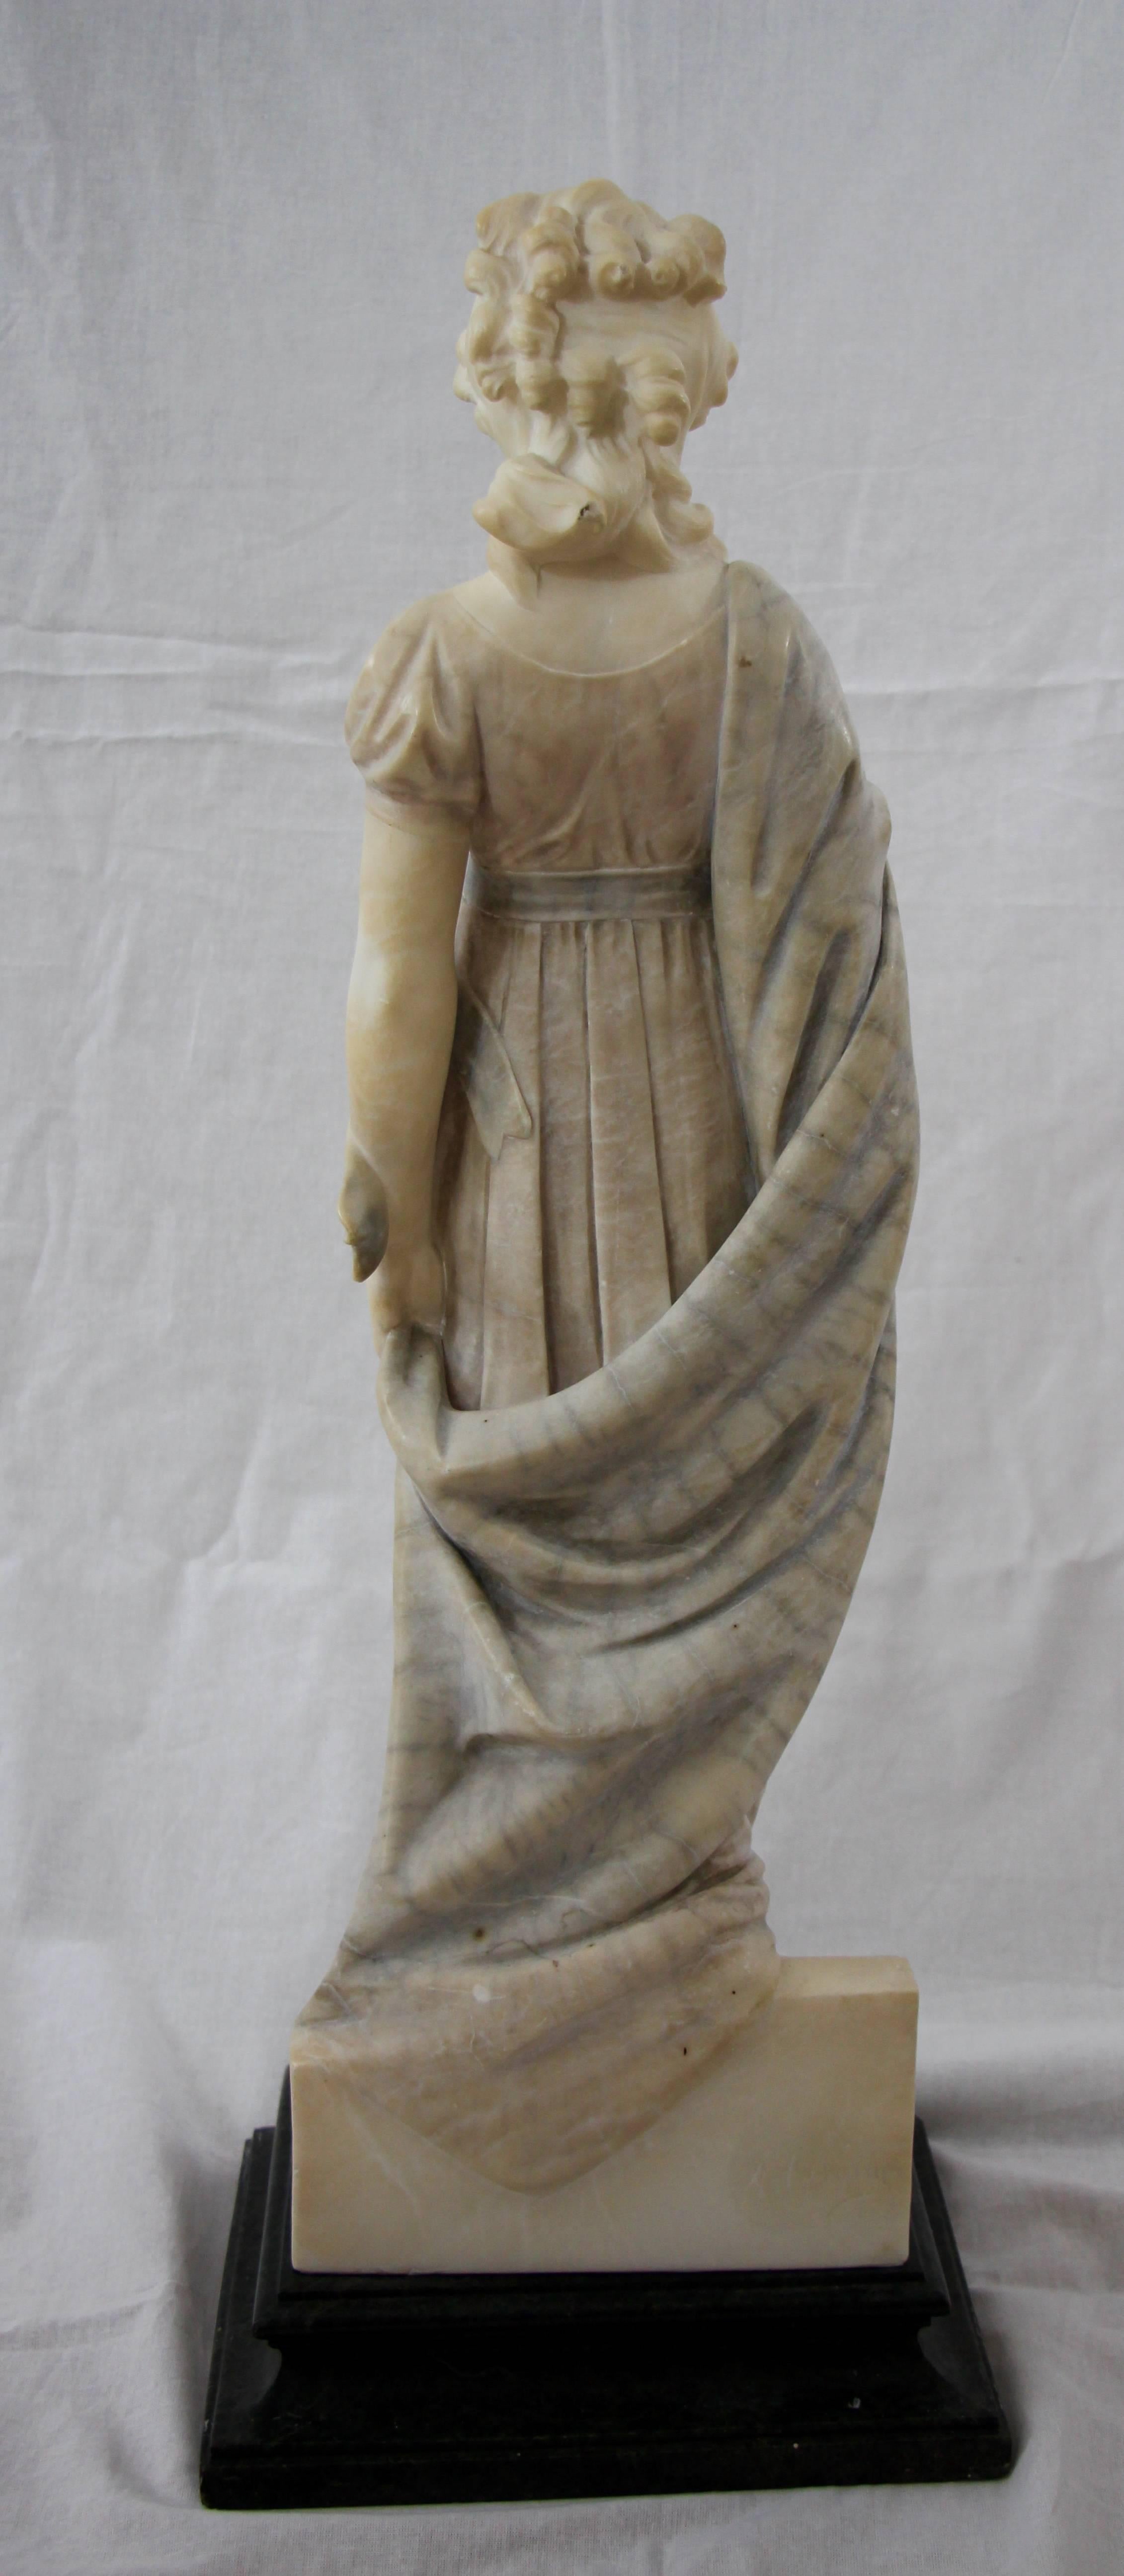 Neoclassical Revival Alabaster Sculpture by Adolfo Cipriani of Queen Louise of Prussia For Sale